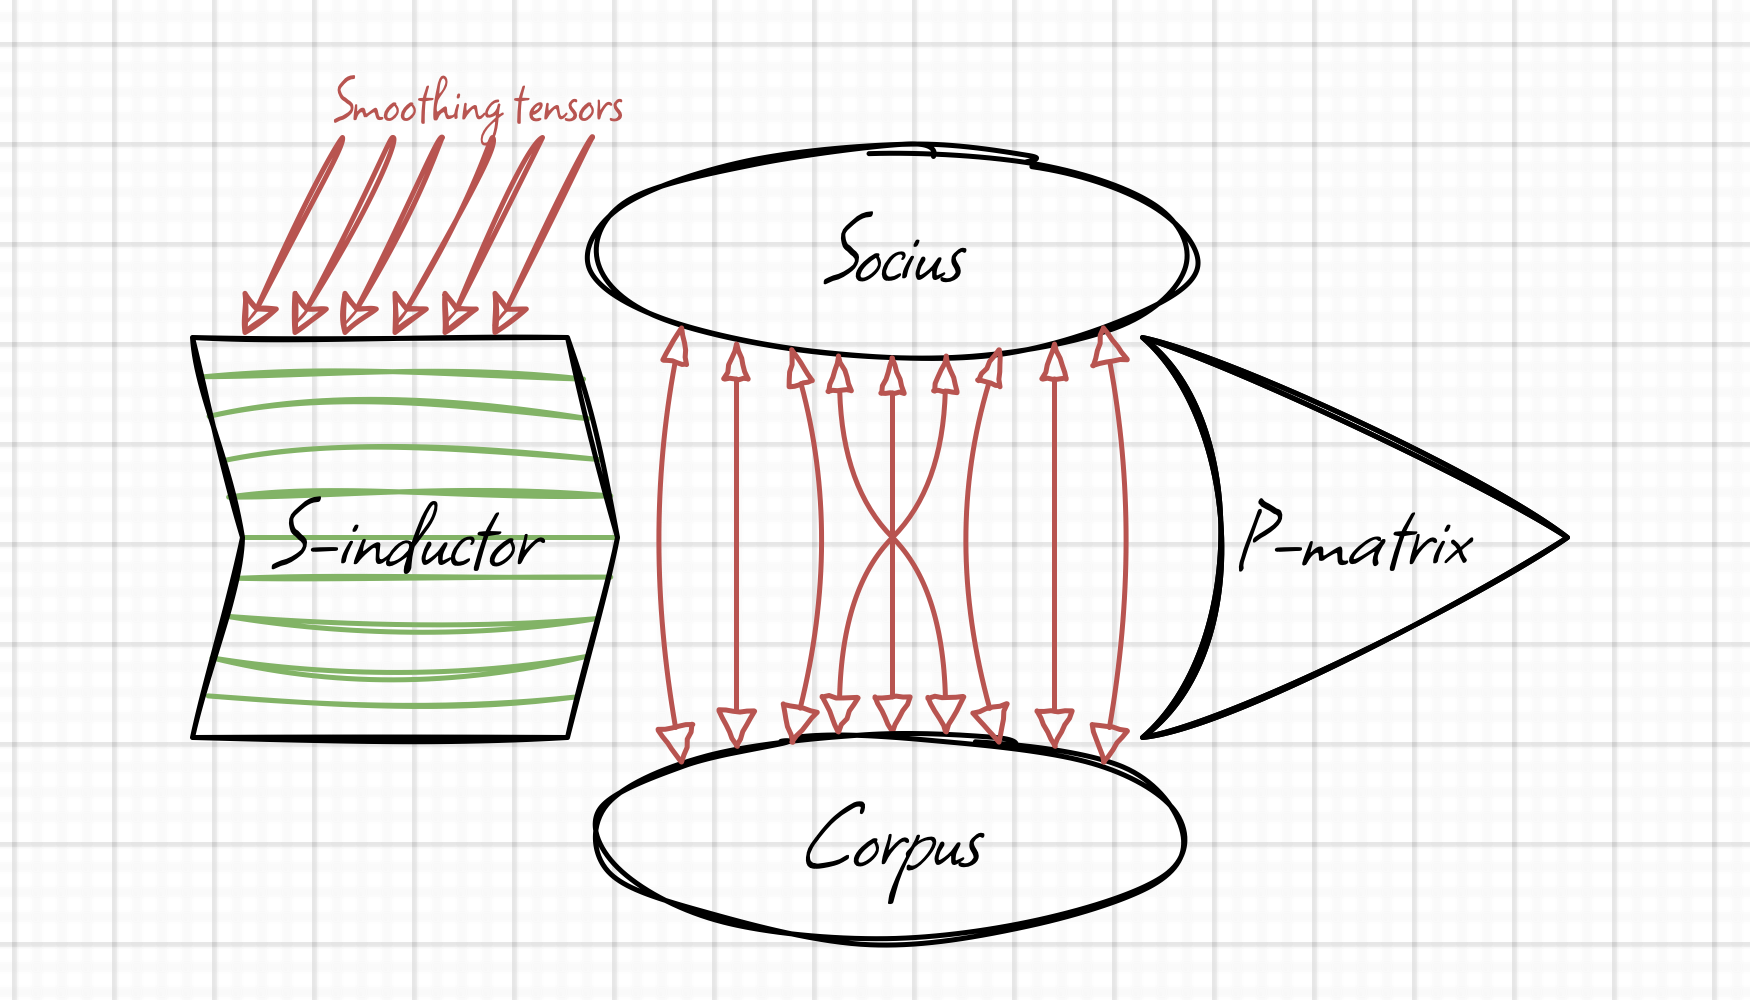 A diagram with four interconnected elements labelled "Socius", "S-inductor", "P-matrix" and "Corpus". The S-inductor is striped with green lines and has red arrows pointing at it labelled "smoothing tensors".